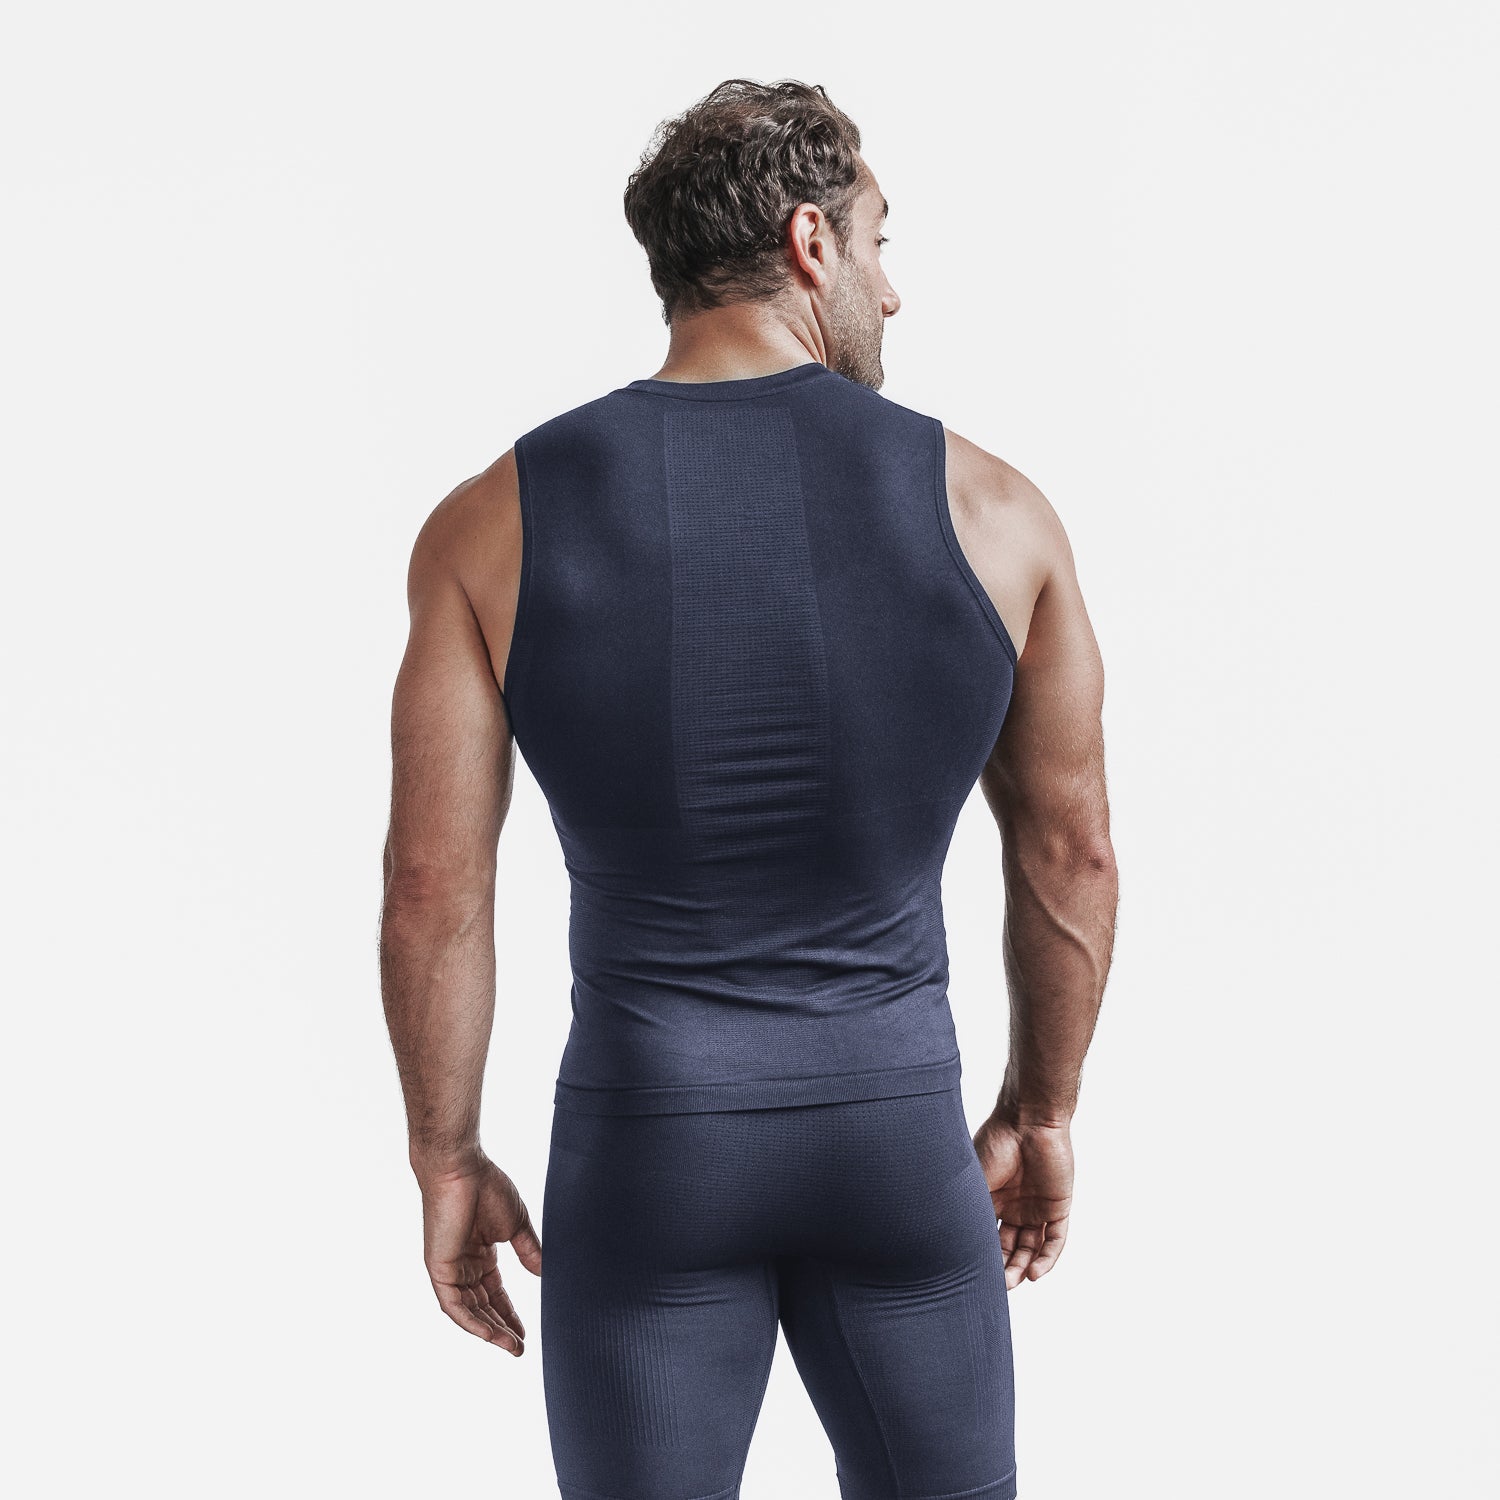 MEN'S MIDWEIGHT SEAMLESS COMPRESSION SLEEVELESS TOP, NAVY